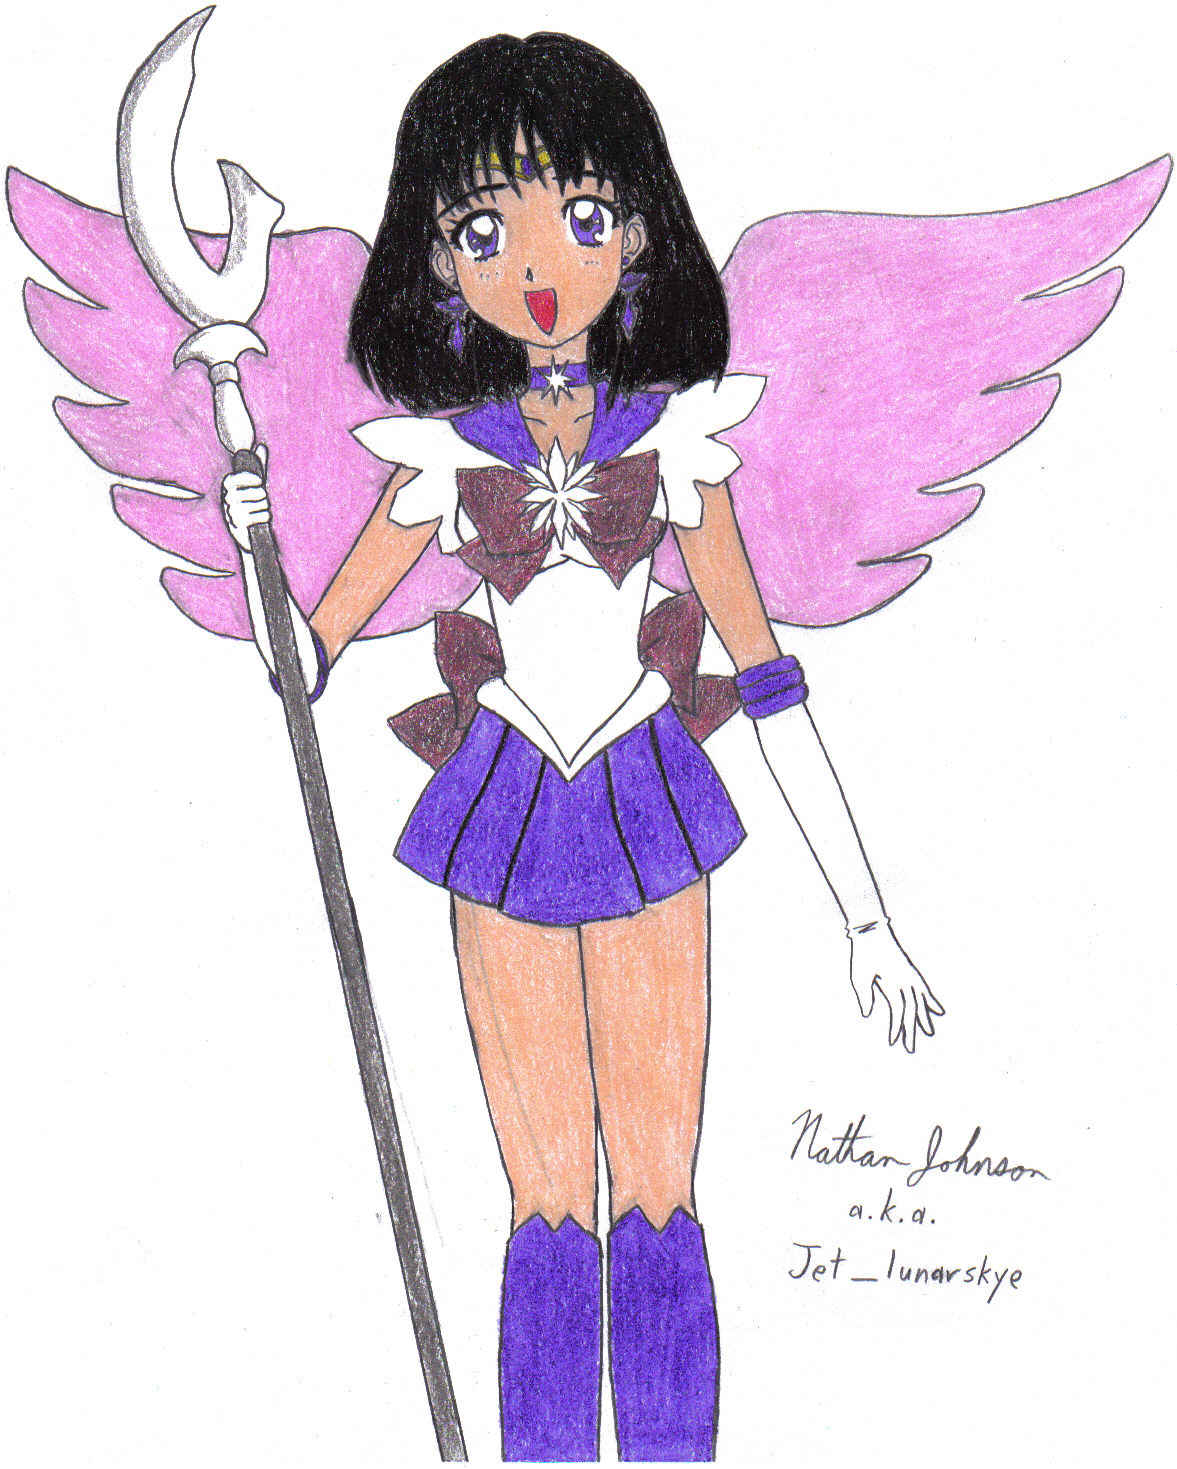 Sailor Saturn with pink wings by Jet_lunarskye